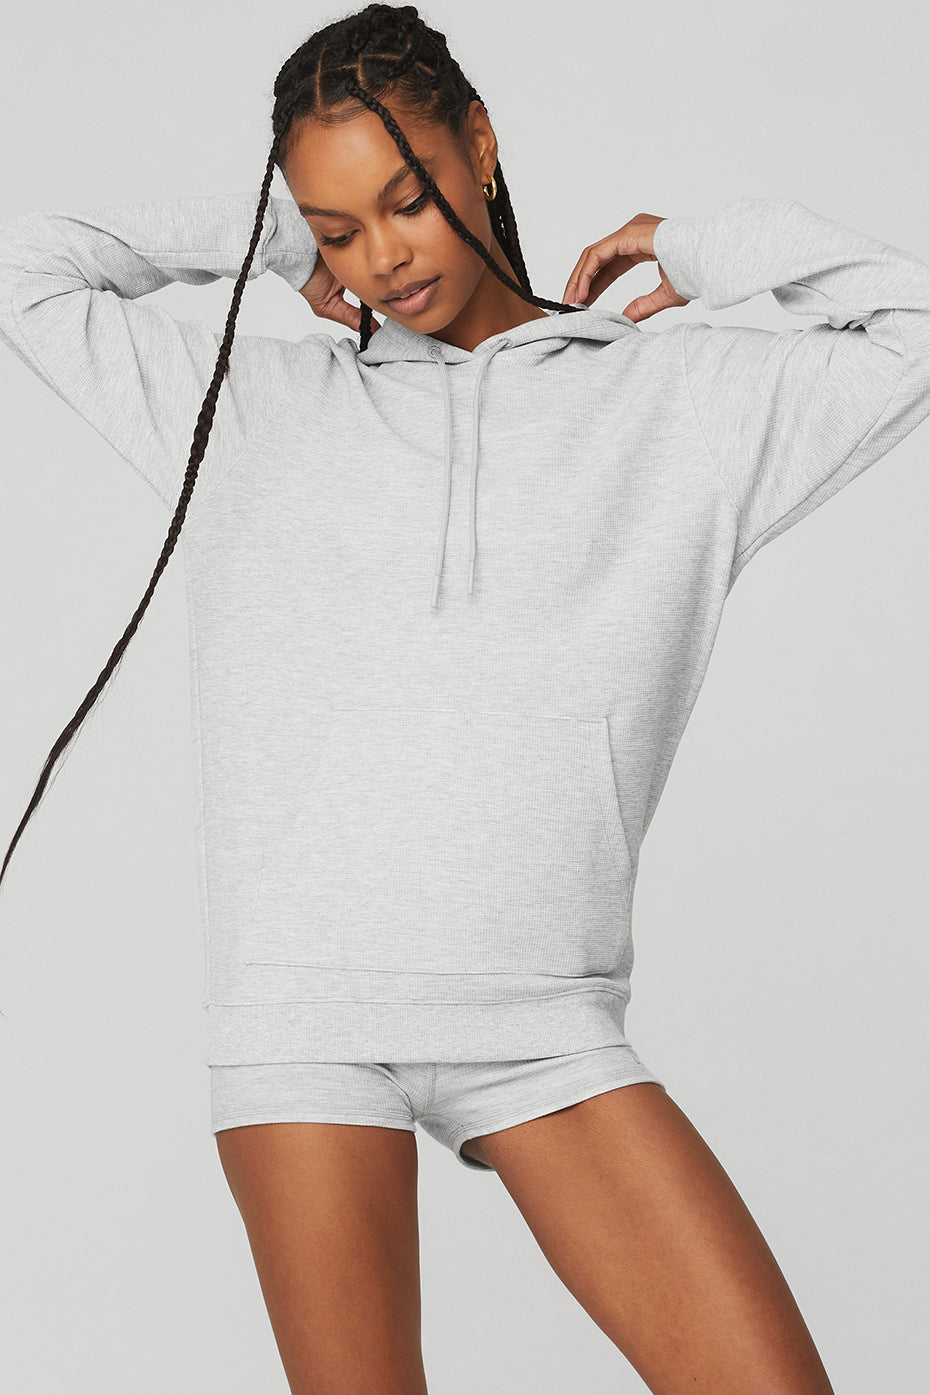 Lululemon Mellow In Hoodie Waffle Knit Heathered Core Medium Grey  Athleisure M L Size L - $60 - From Jillian